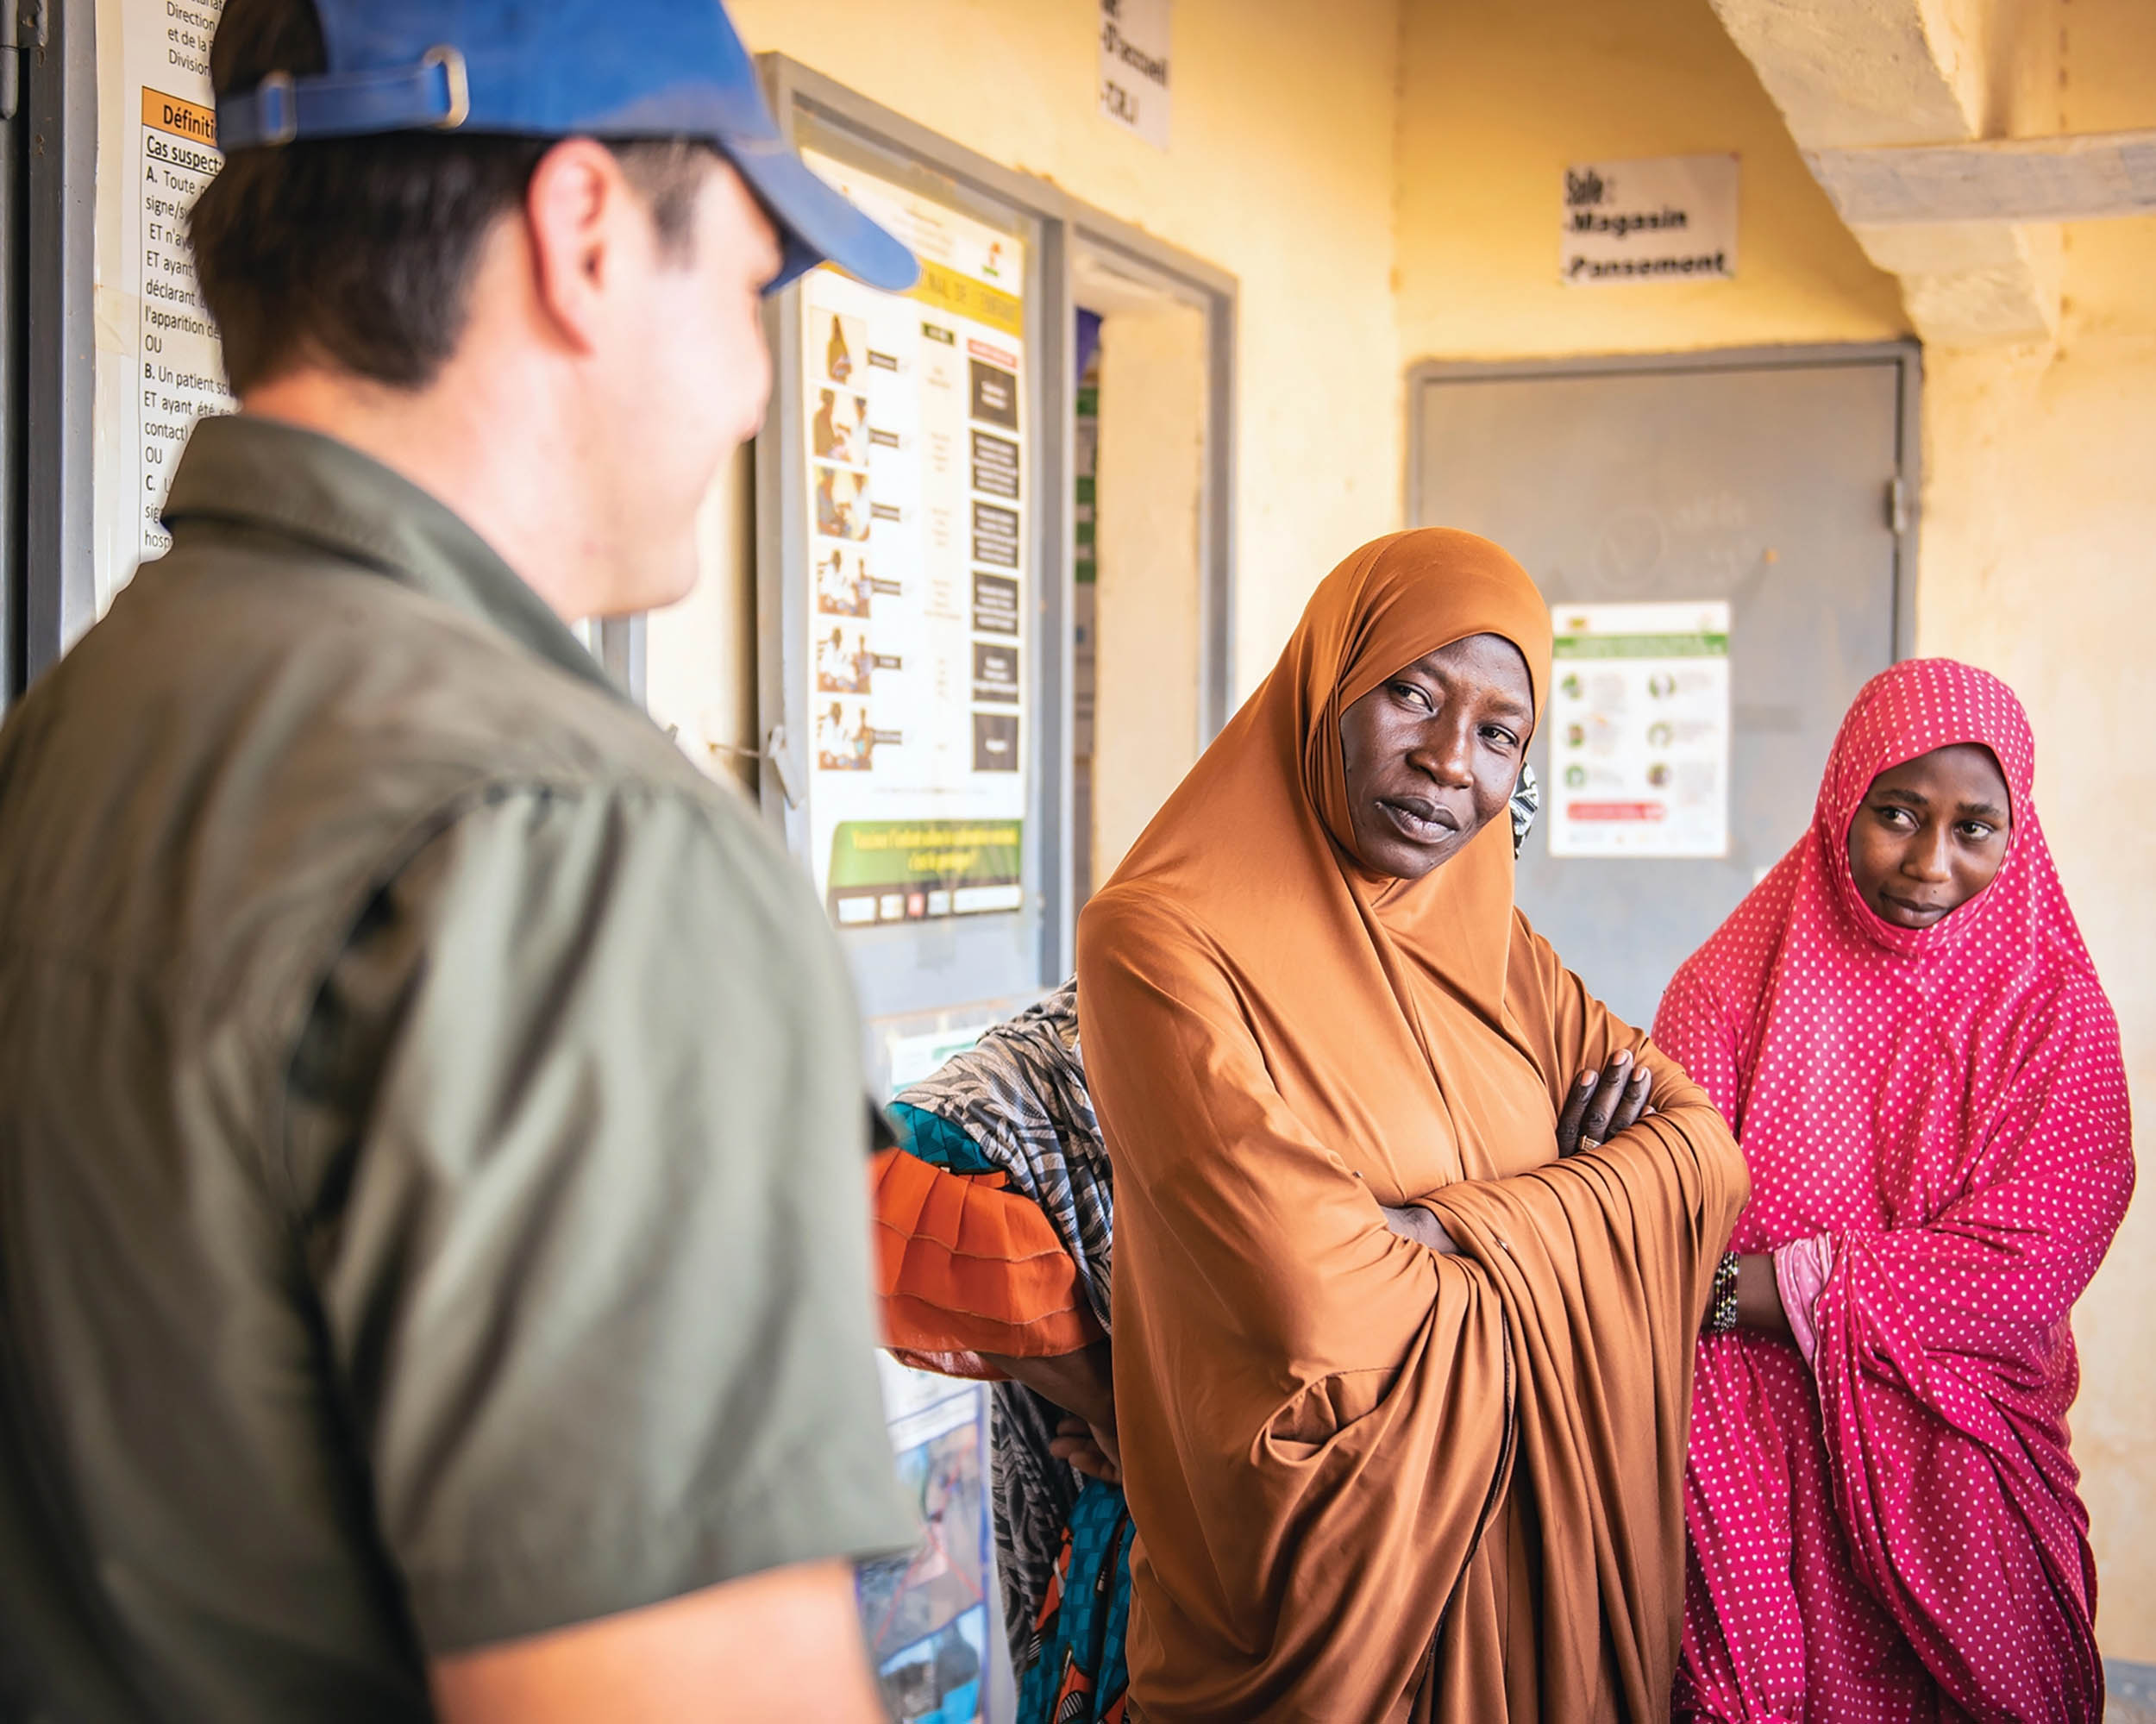 Village nurses from integrated health center discuss village’s medical concerns with Soldiers